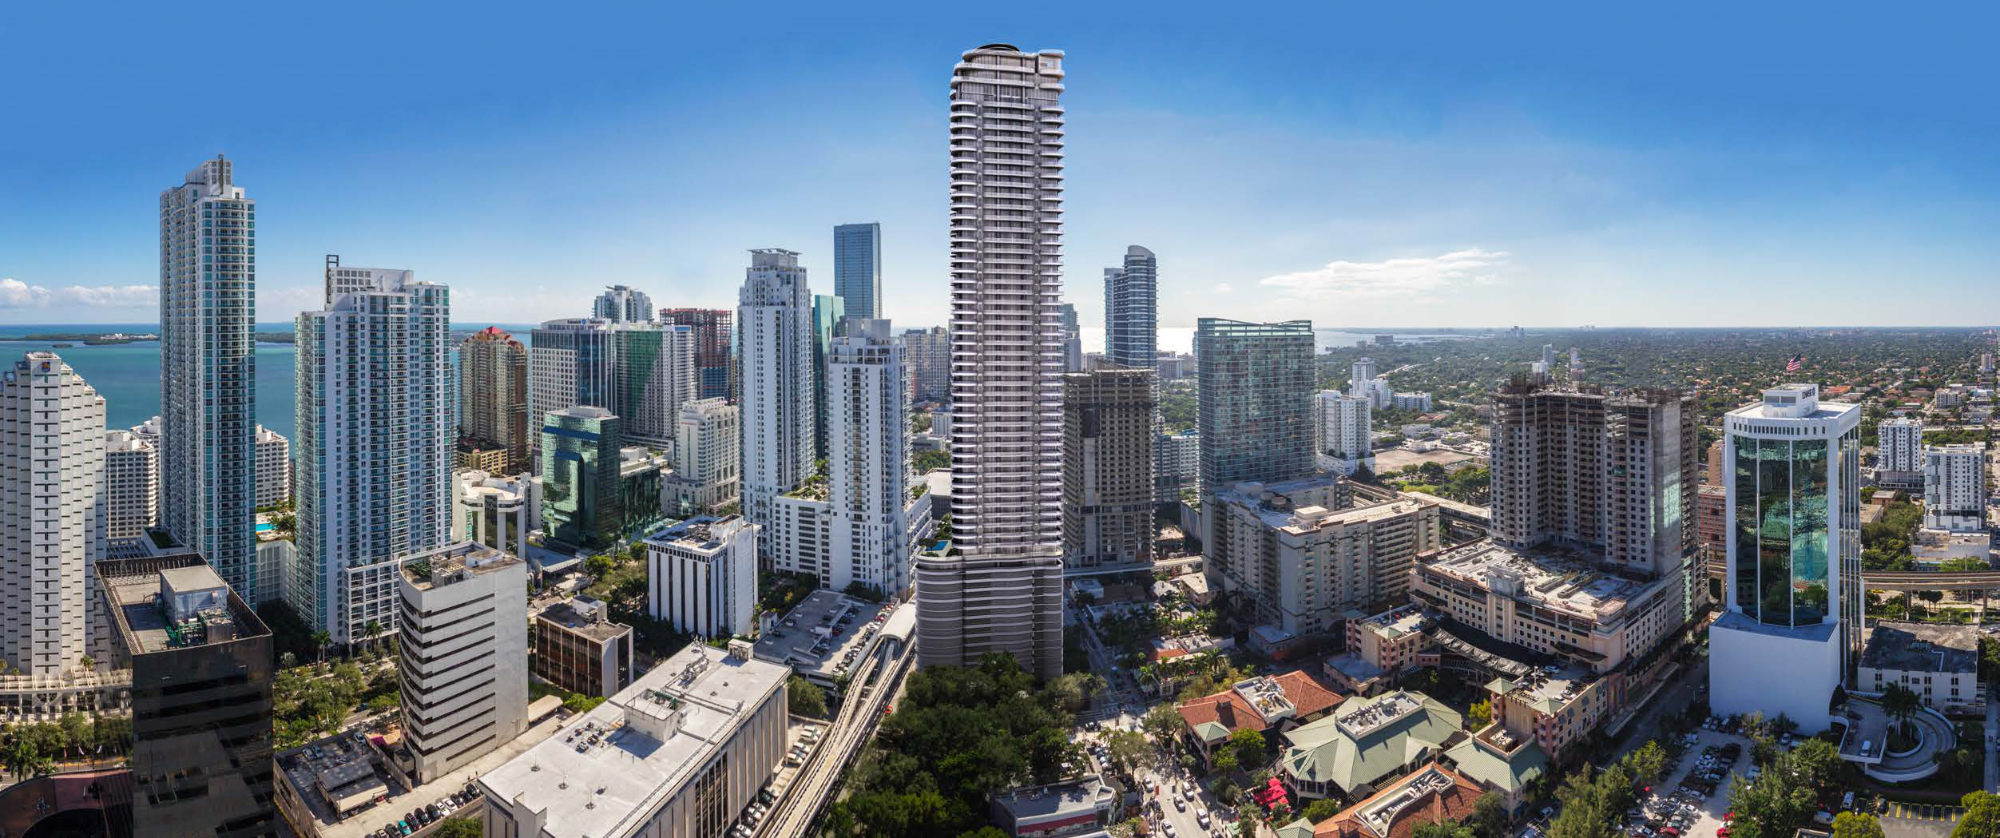 Brickell Flatiron Condo Miami: A Guide to the High-Rise Living Experience